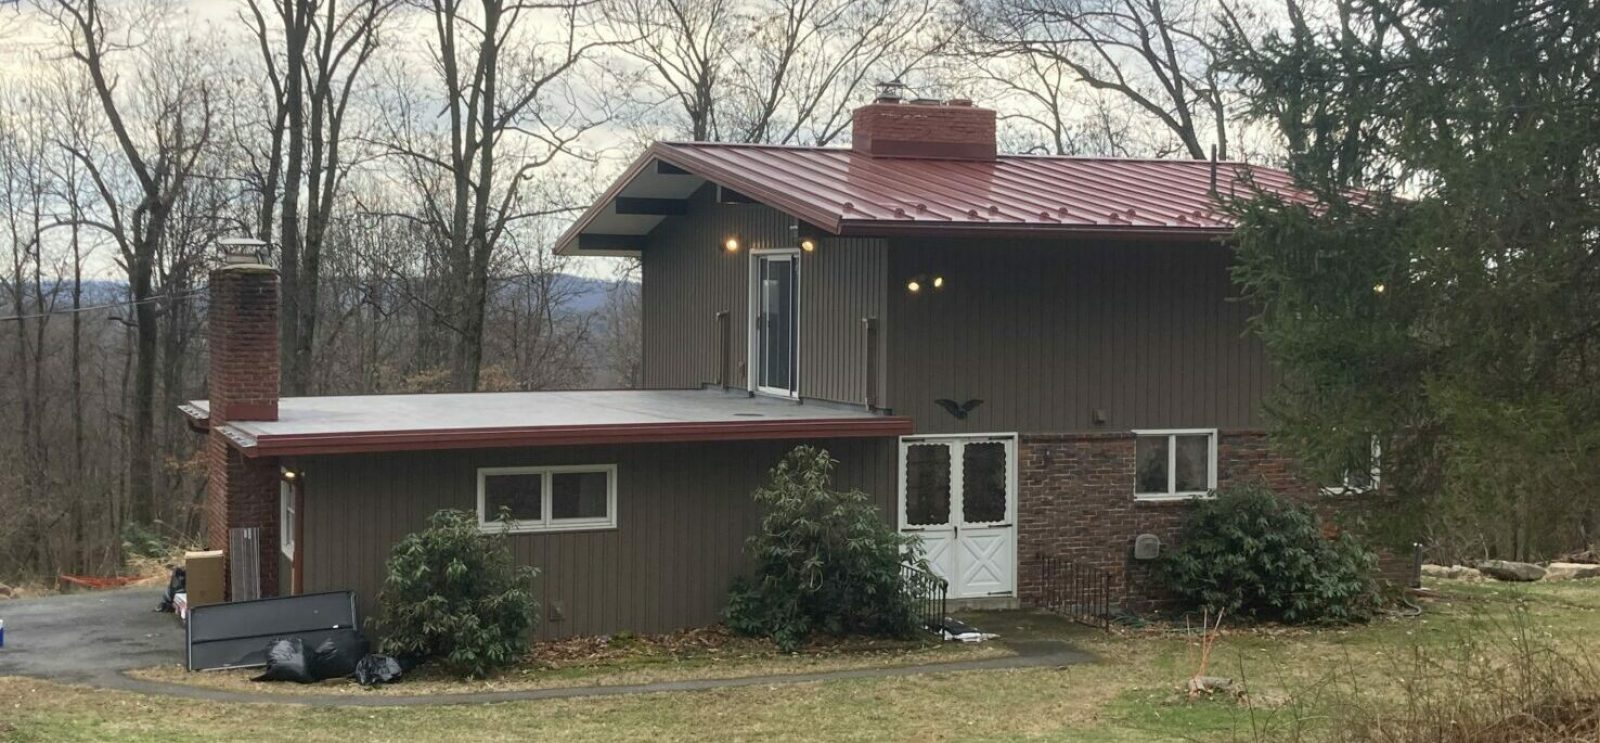 ABS Metal Roof, Color: Colonial Red, Red Seamless Gutters White Vinyl Soffit, Red Fascia, EPDM Rubber Roof on lower section, Mohnton, PA, Berks Co. PA, Installed April 2022